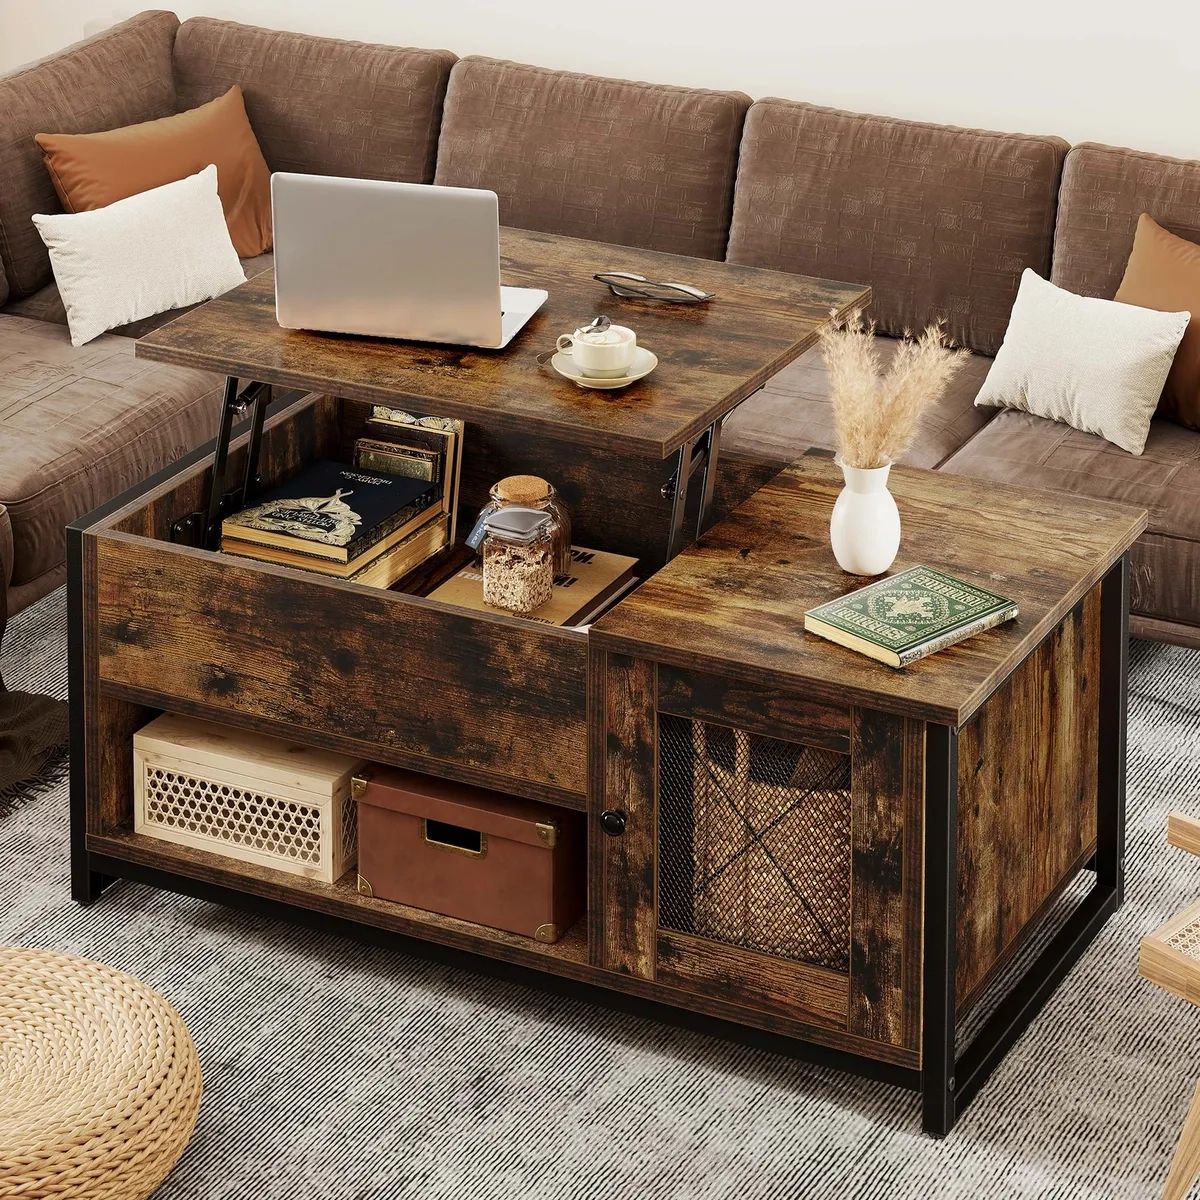 Farmhouse Lift Top Coffee Table With Hidden Compartment And Storage Shelf  Brown | Ebay Pertaining To Lift Top Coffee Tables With Shelves (Photo 10 of 15)